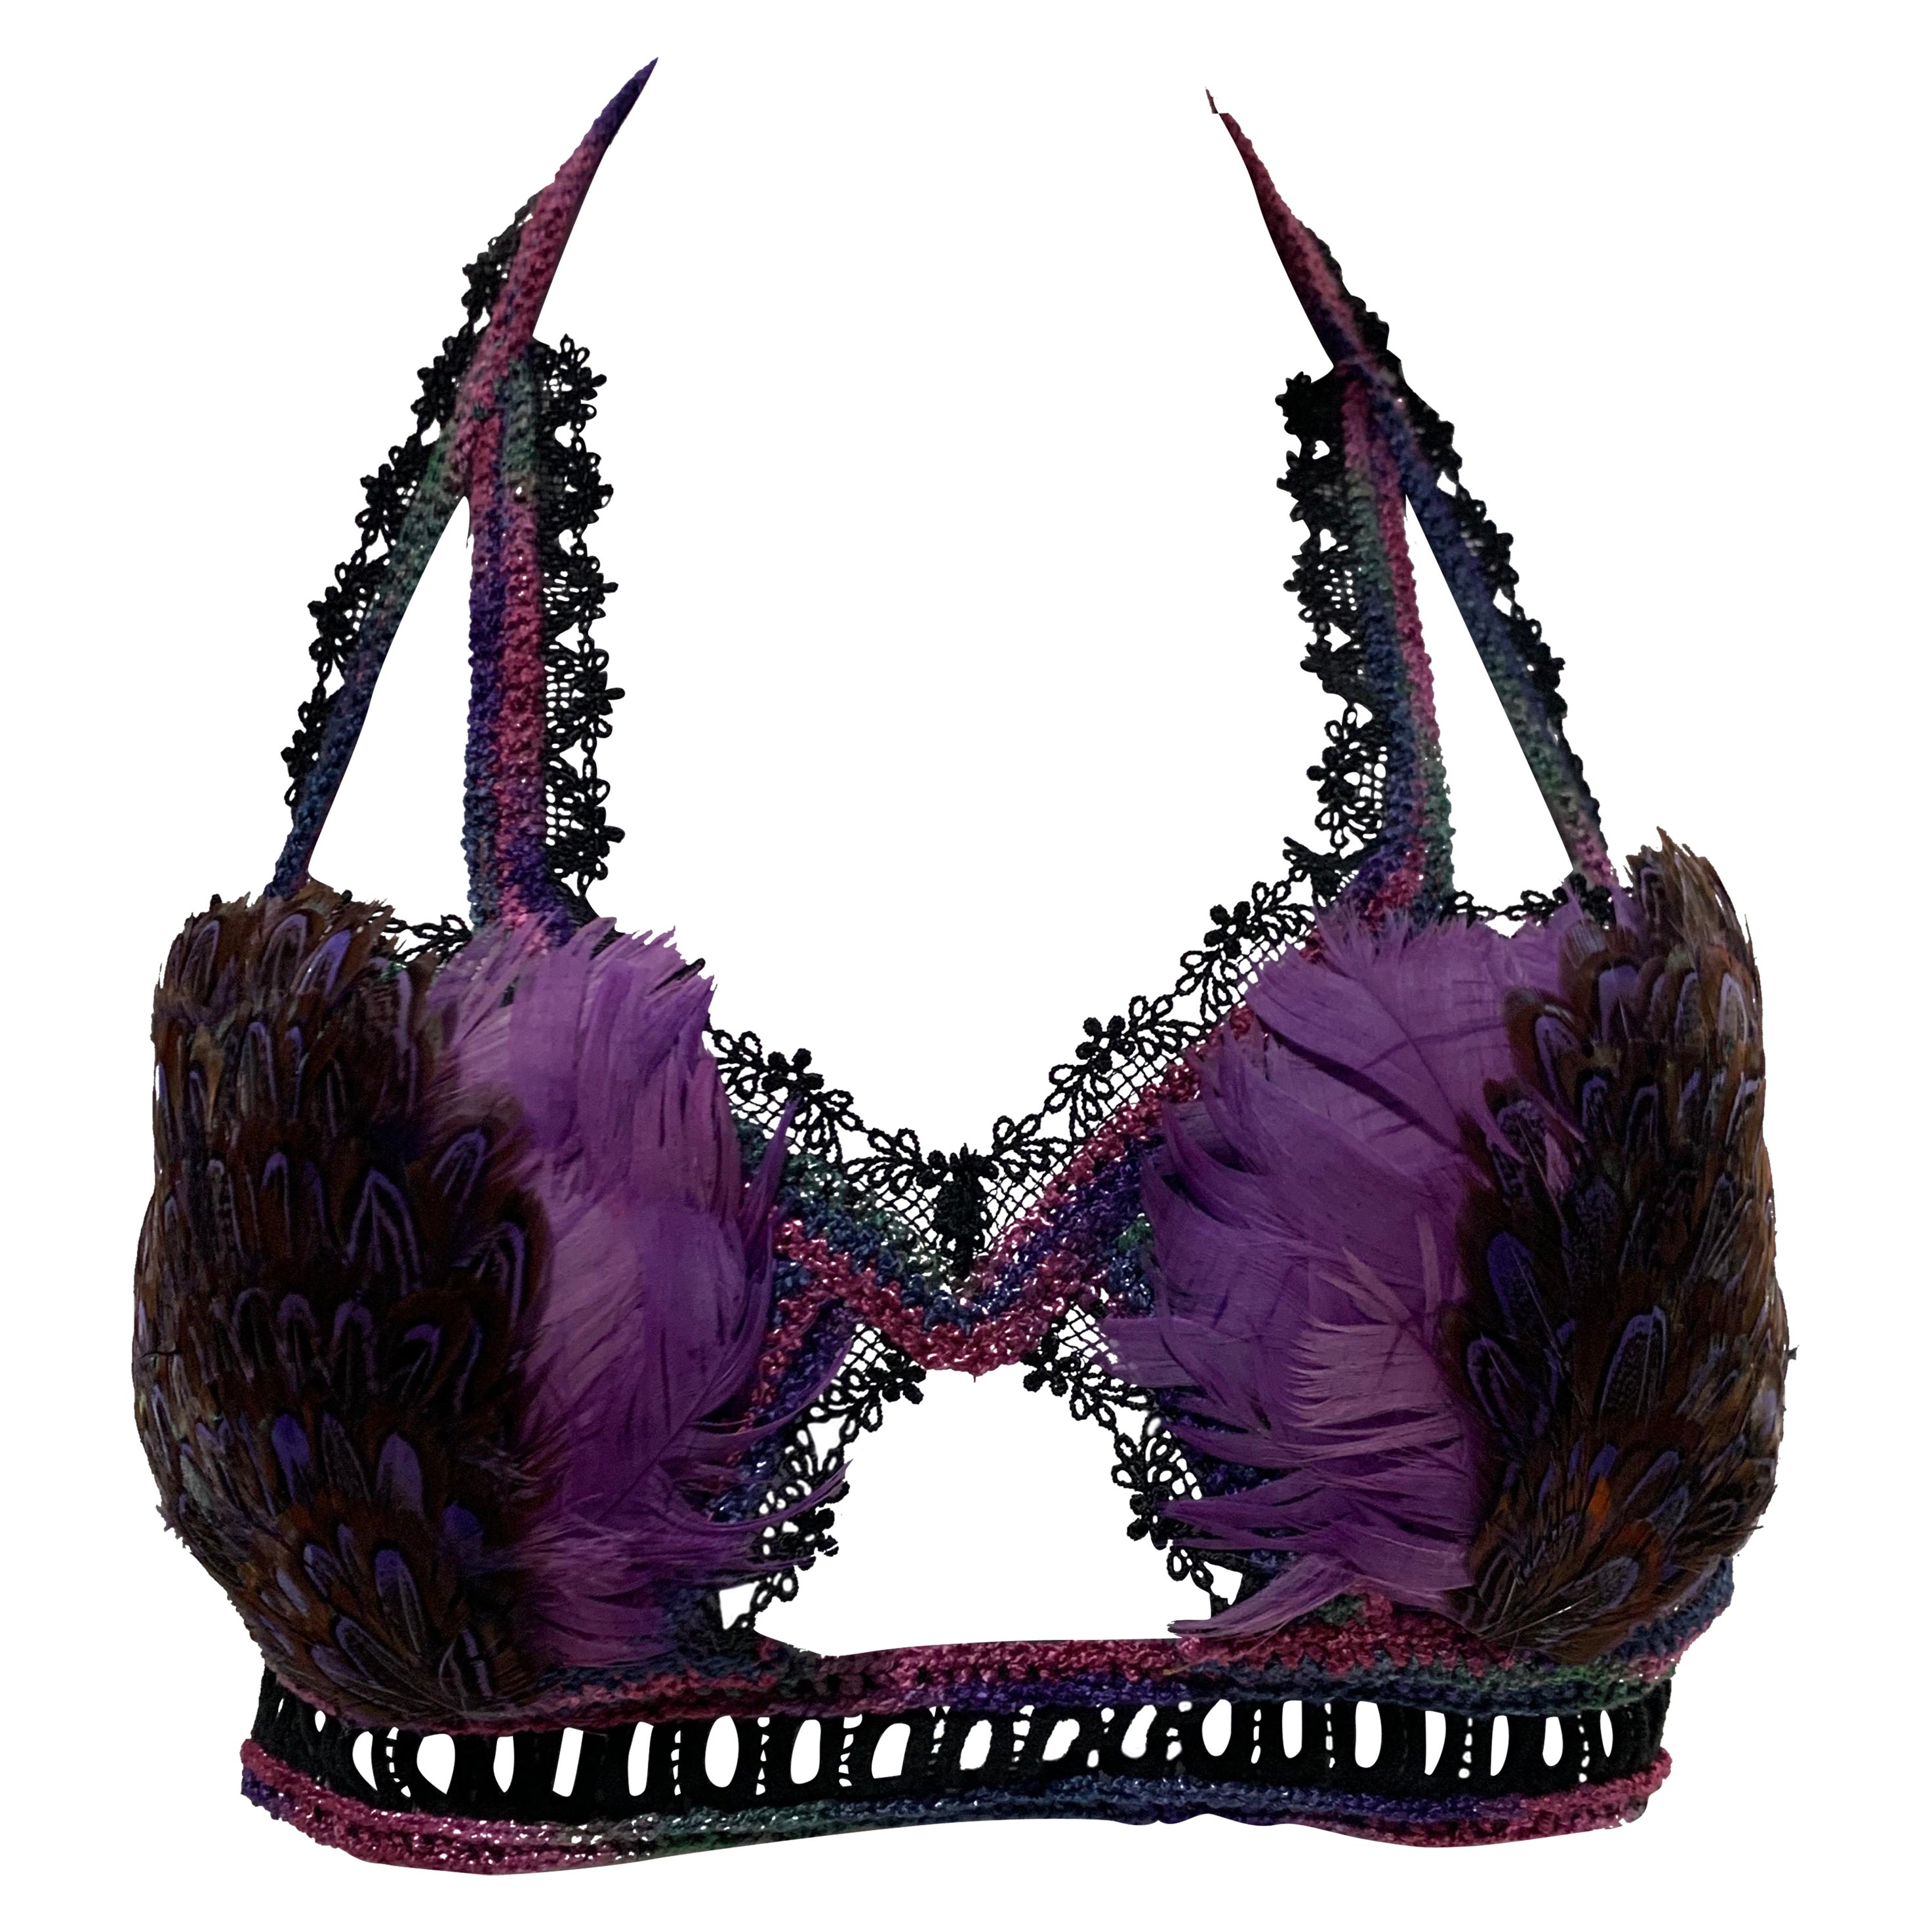 Torso Creations Feathered Lace Bralette in Purple and Black Lace and Crochet